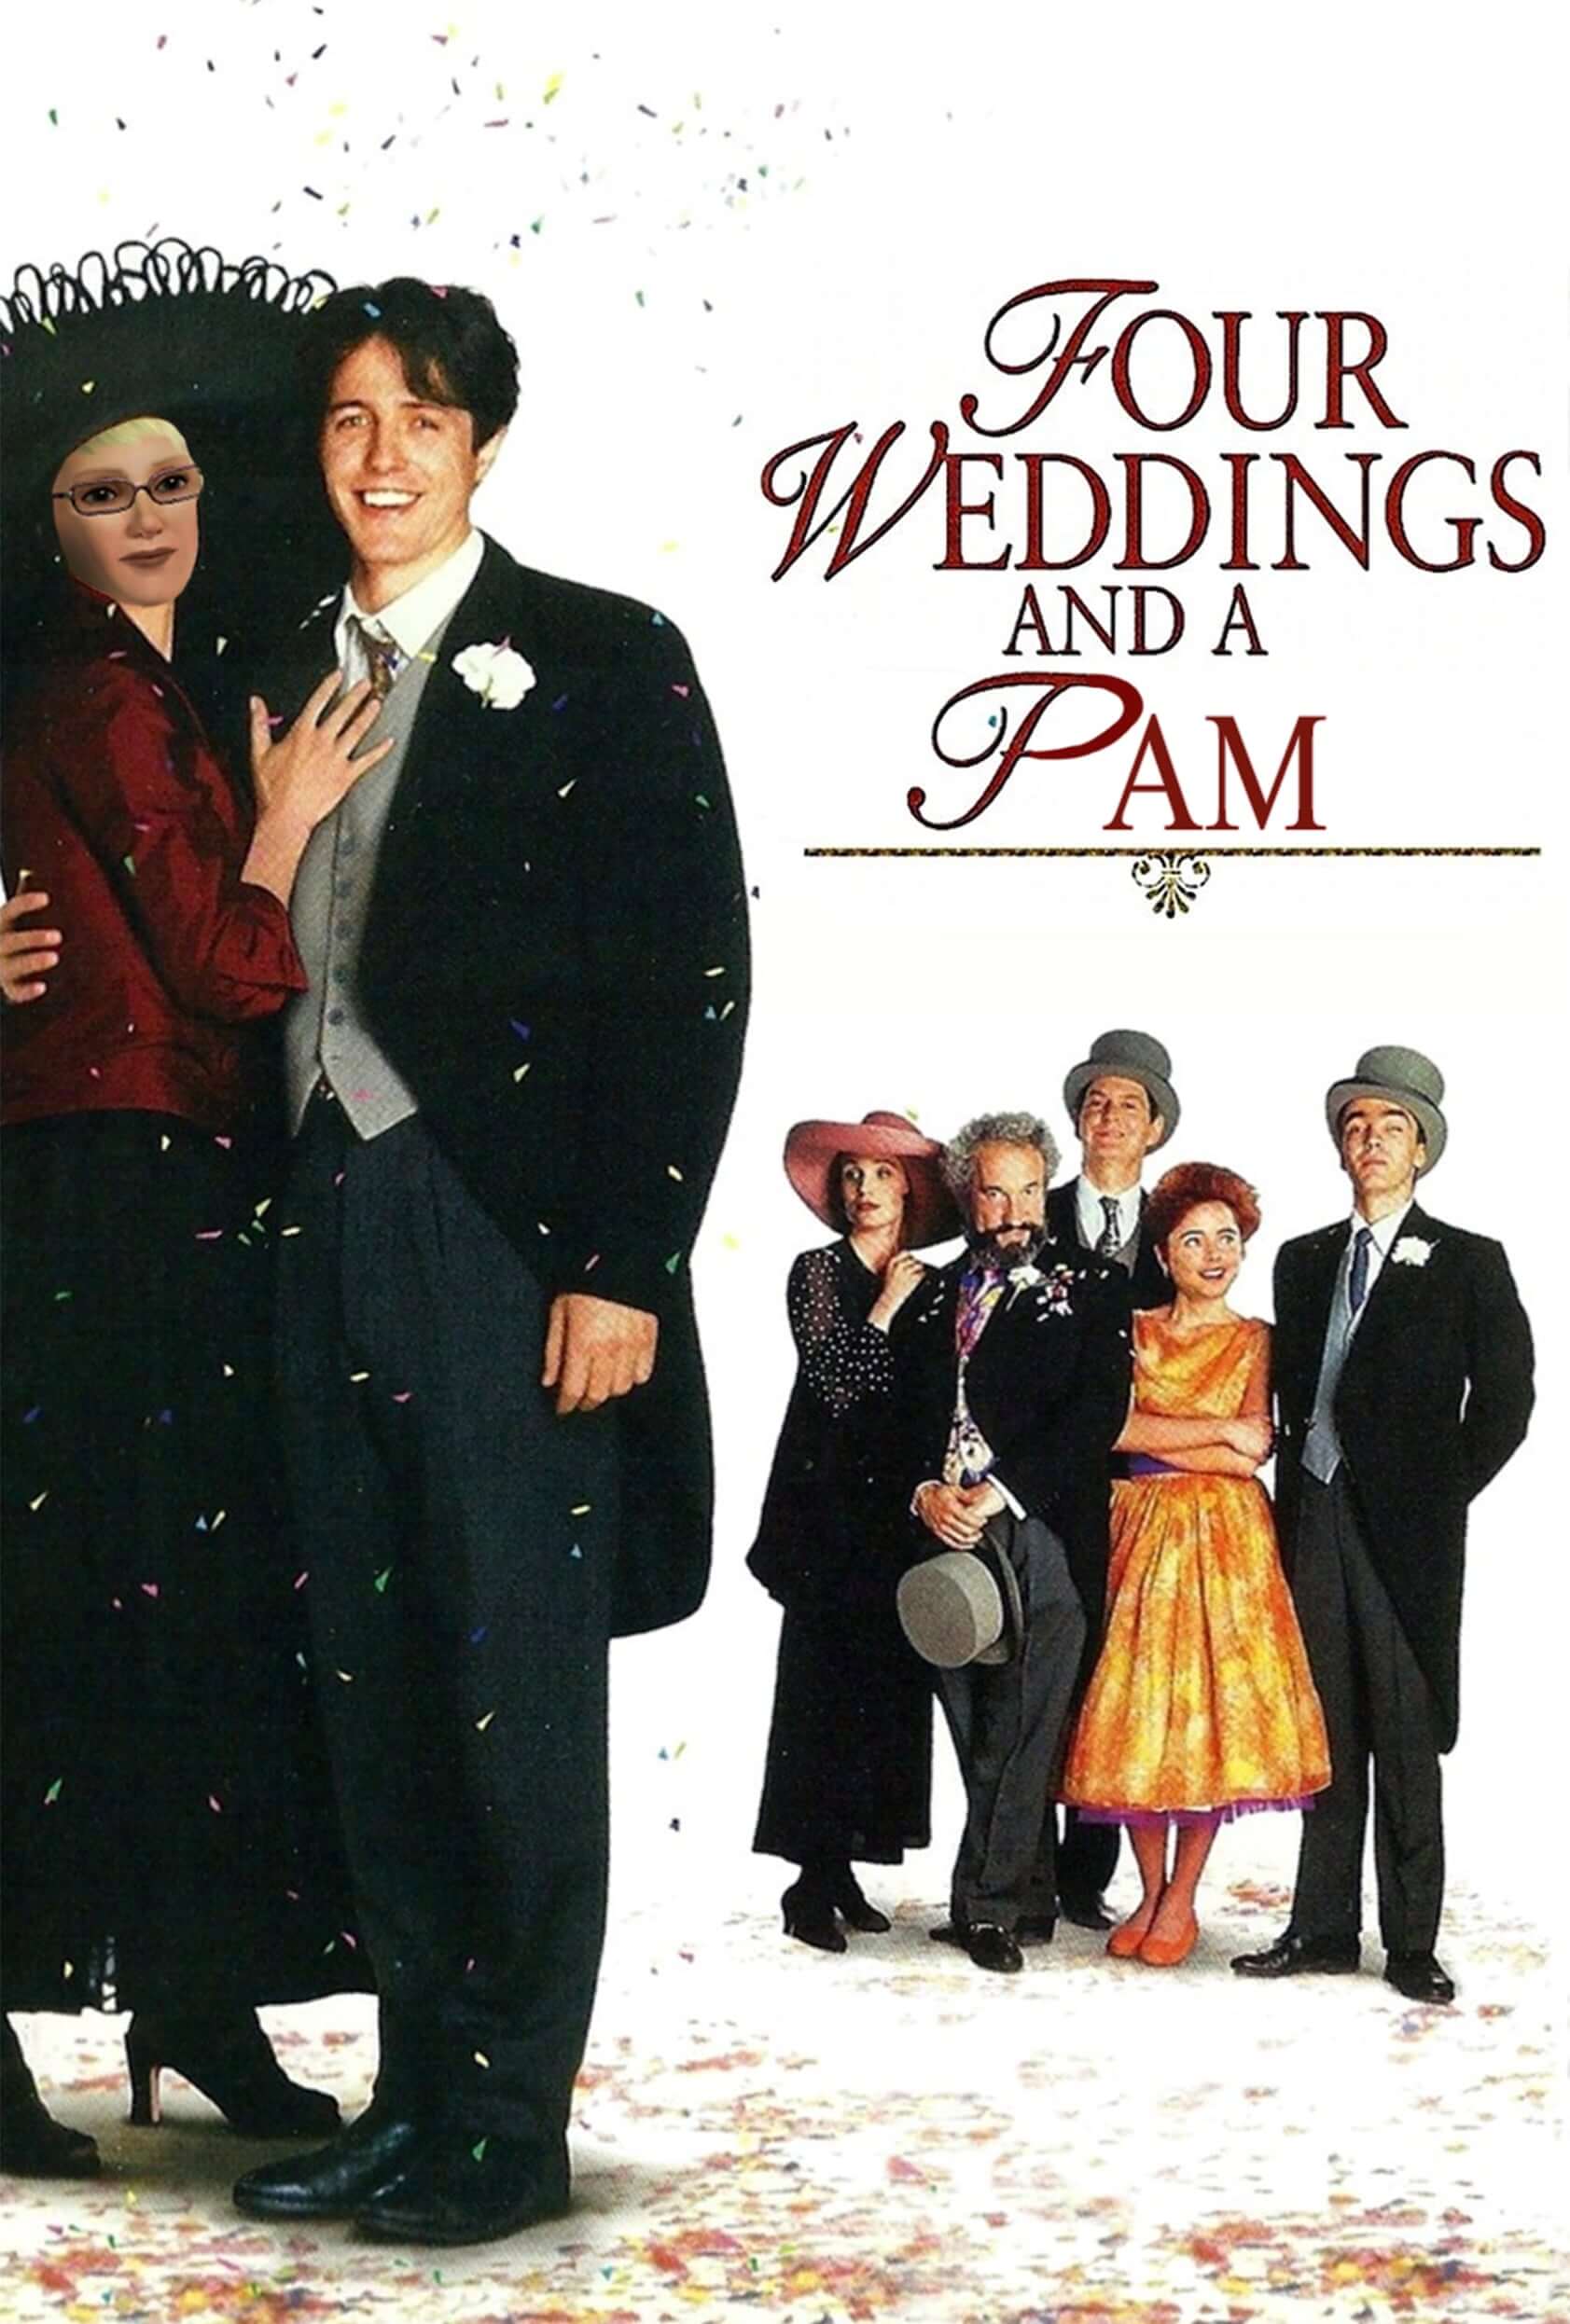 Four Weddings and a Pam